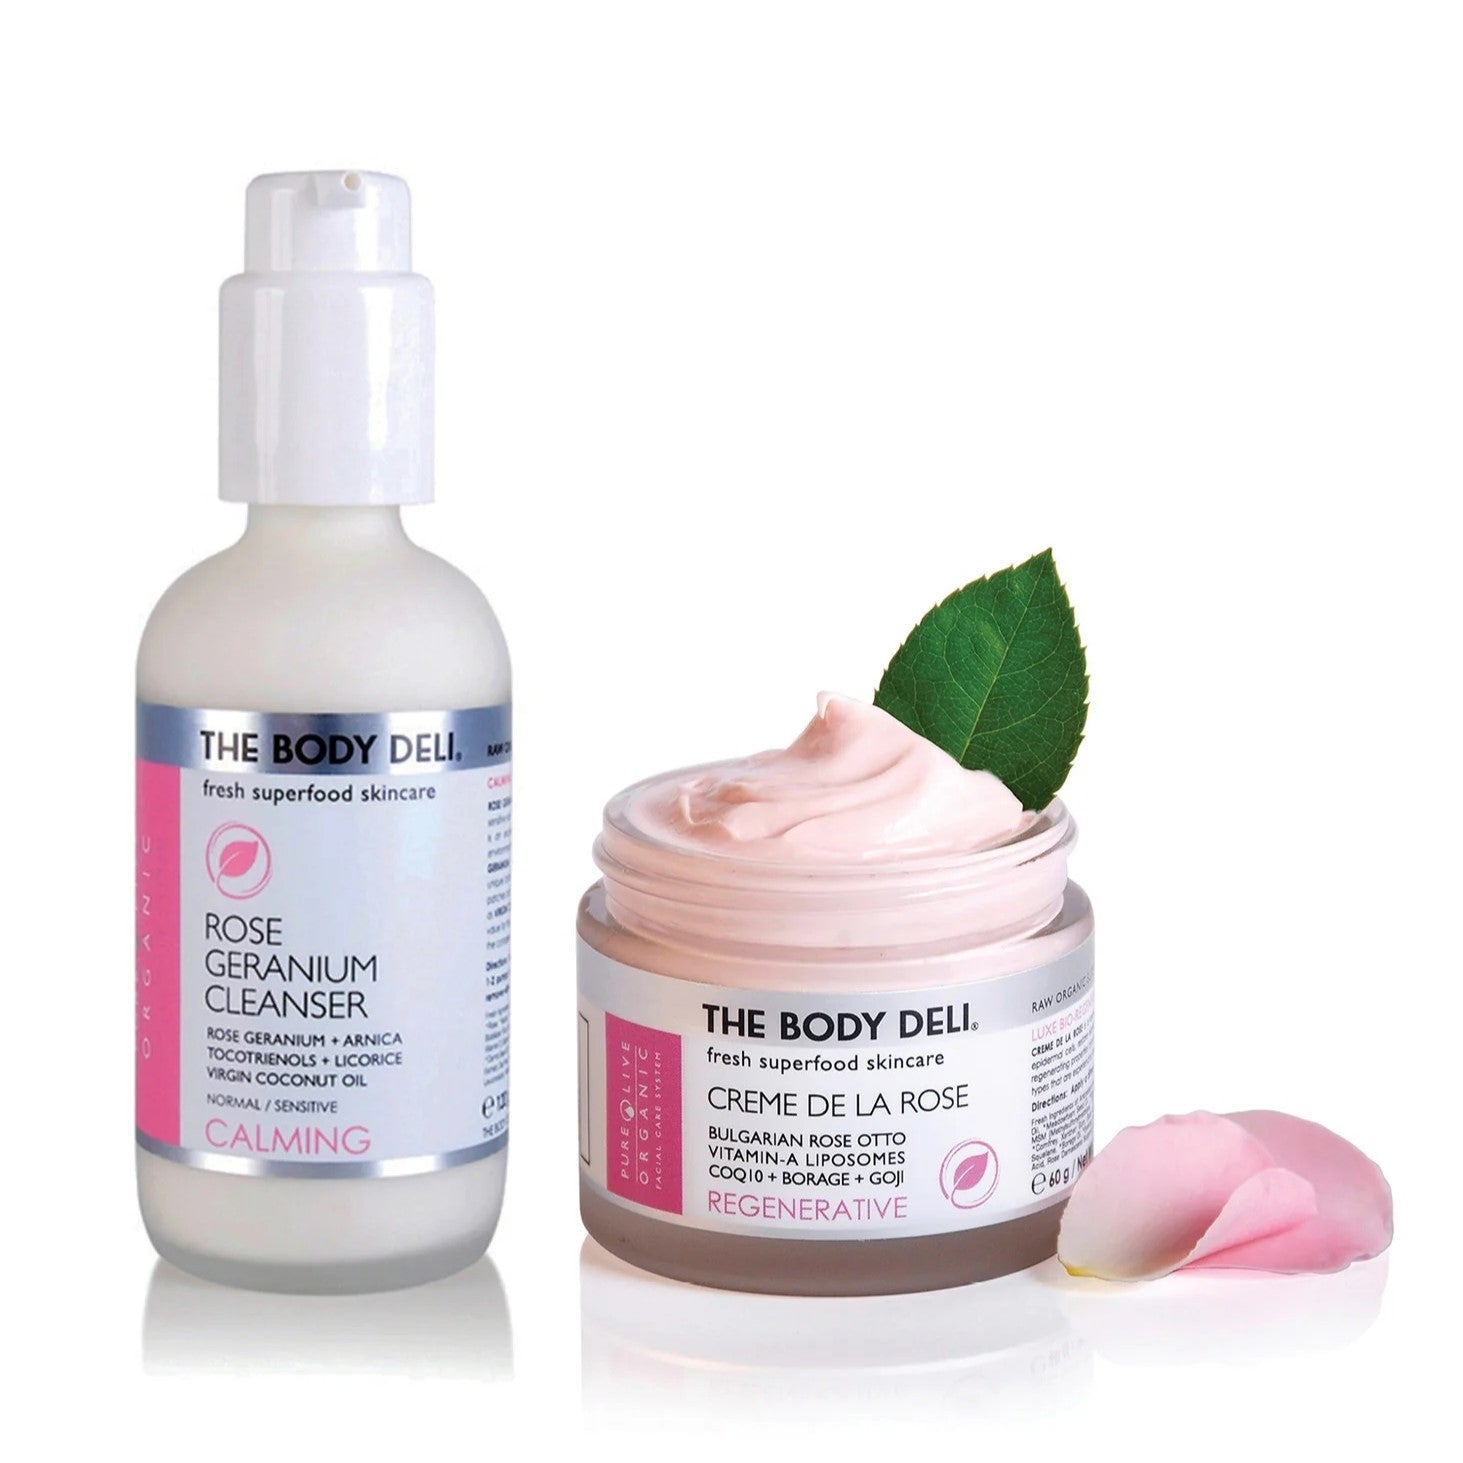 THE BODY DELI - The Rose Collection